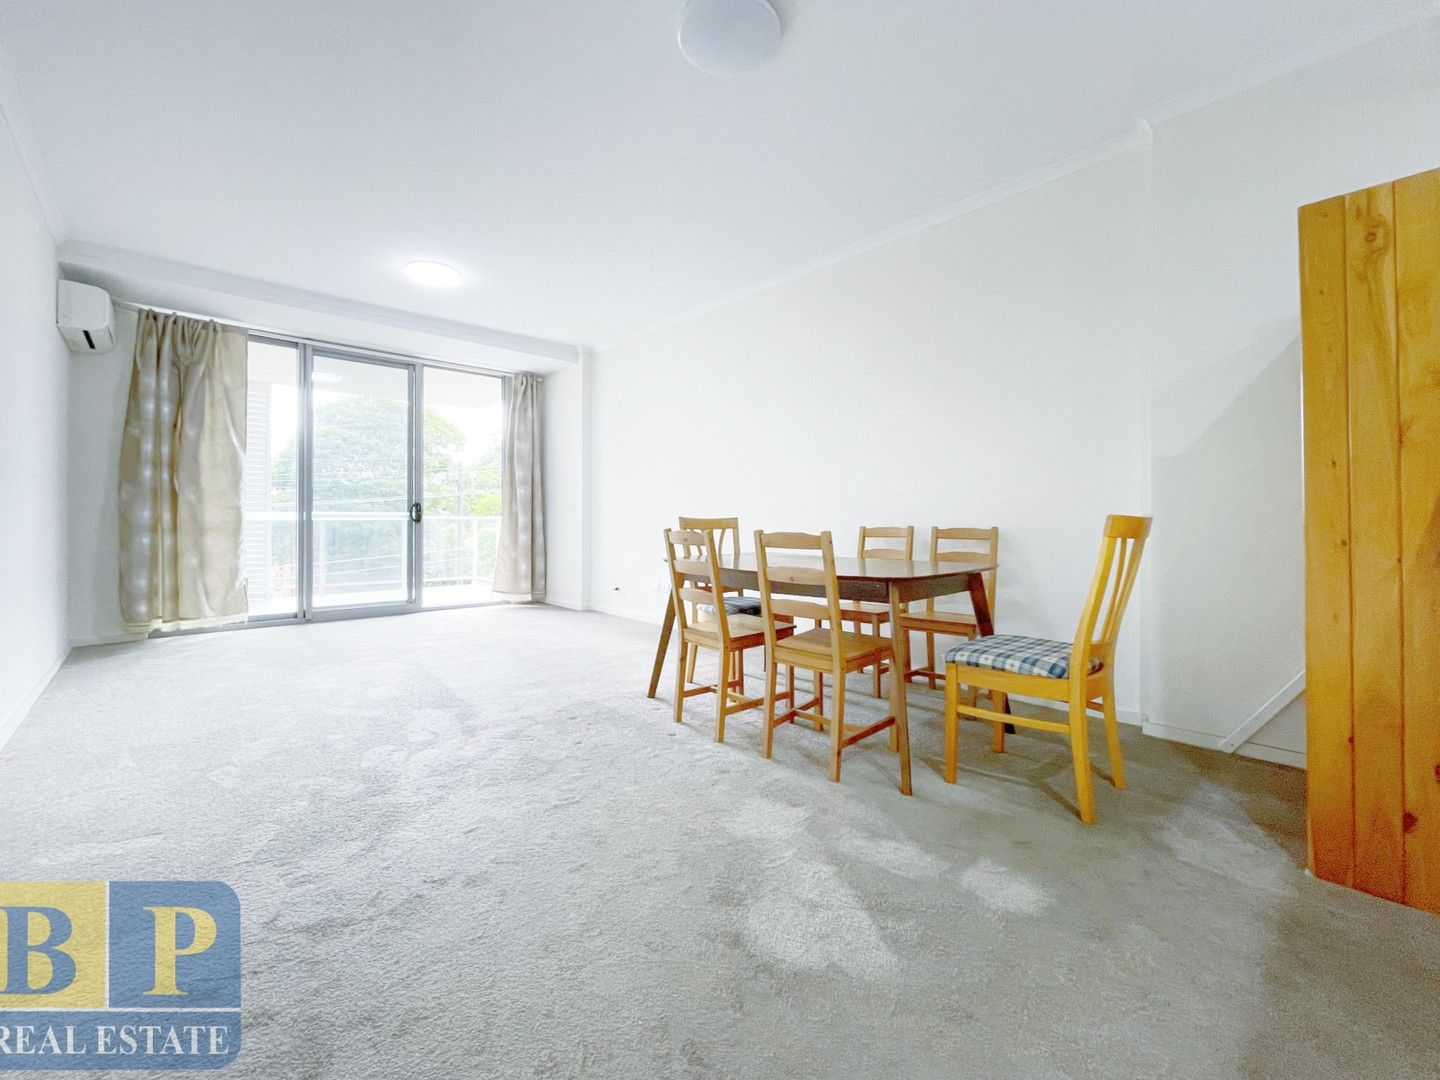 2 bedrooms Apartment / Unit / Flat in 235/22-30 Station St AUBURN NSW, 2144